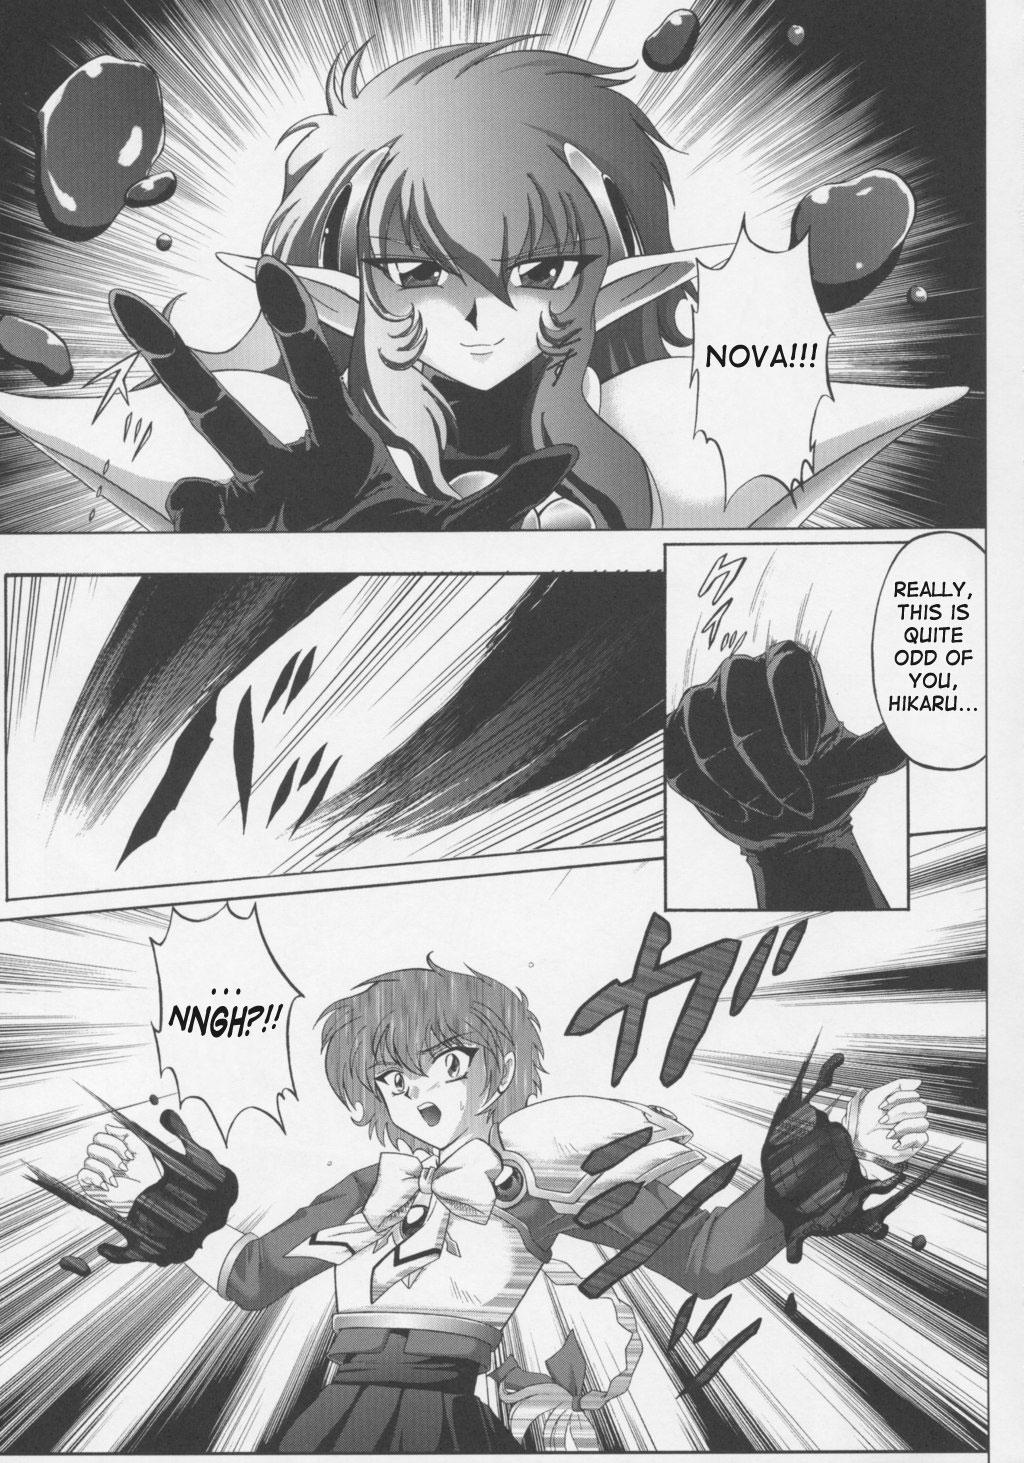 Babes Centris - Magic knight rayearth Weird - Page 4